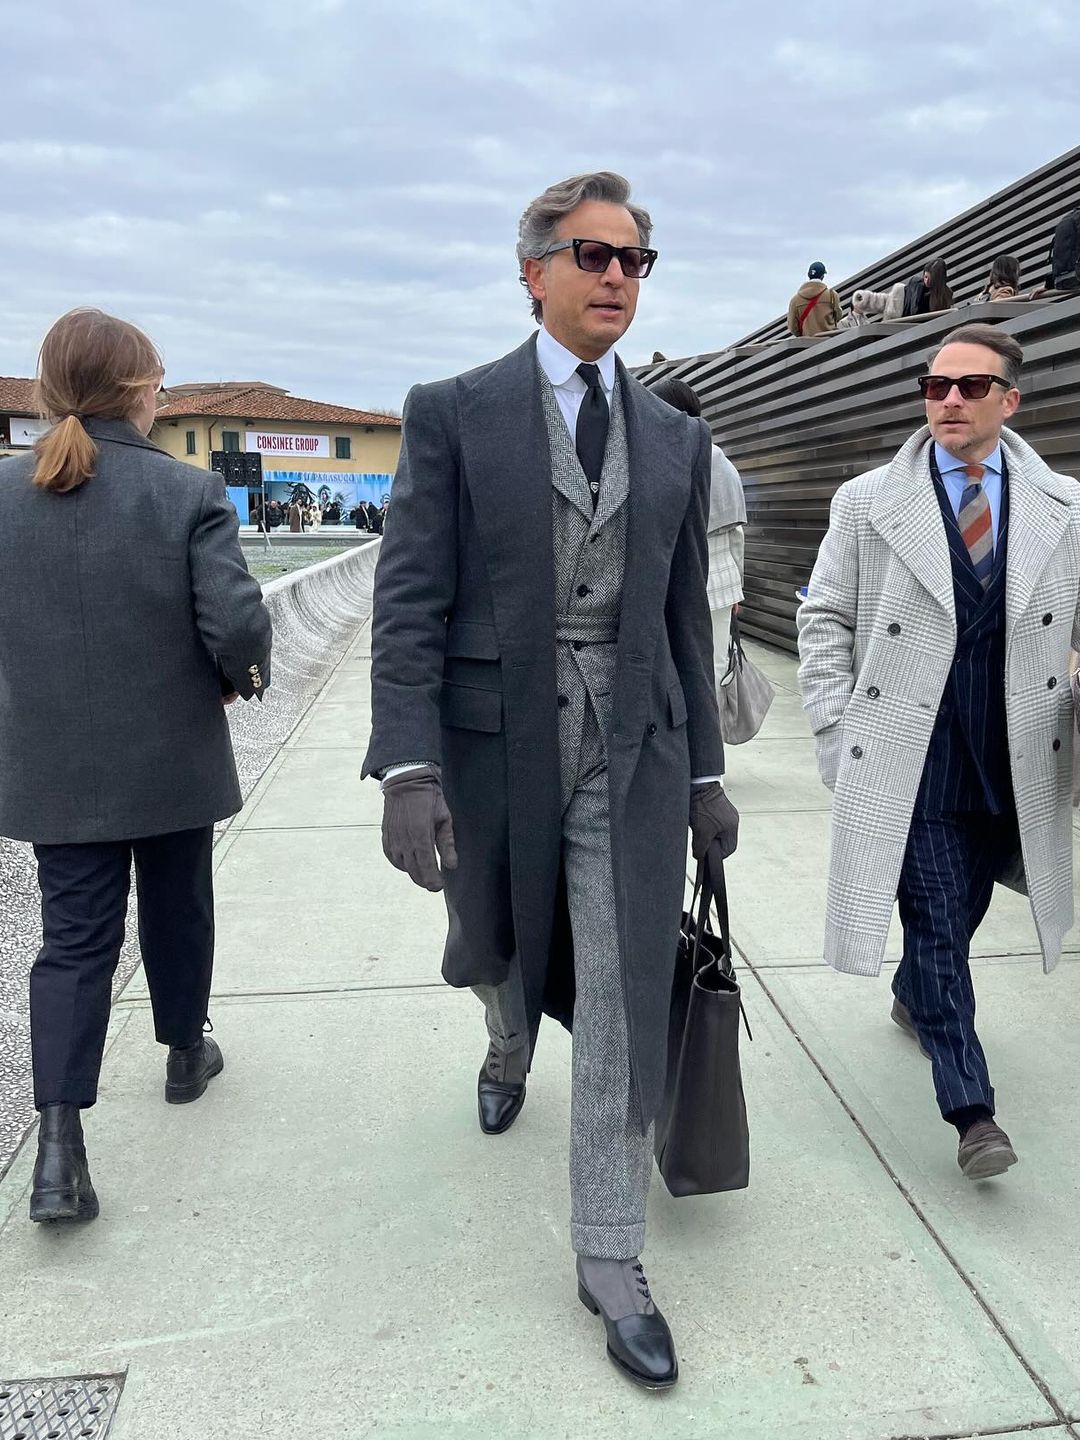 Wearing a grey suit, overcoat, gloves and leather tote bag, this seriously chic guest attends Piti Uomo